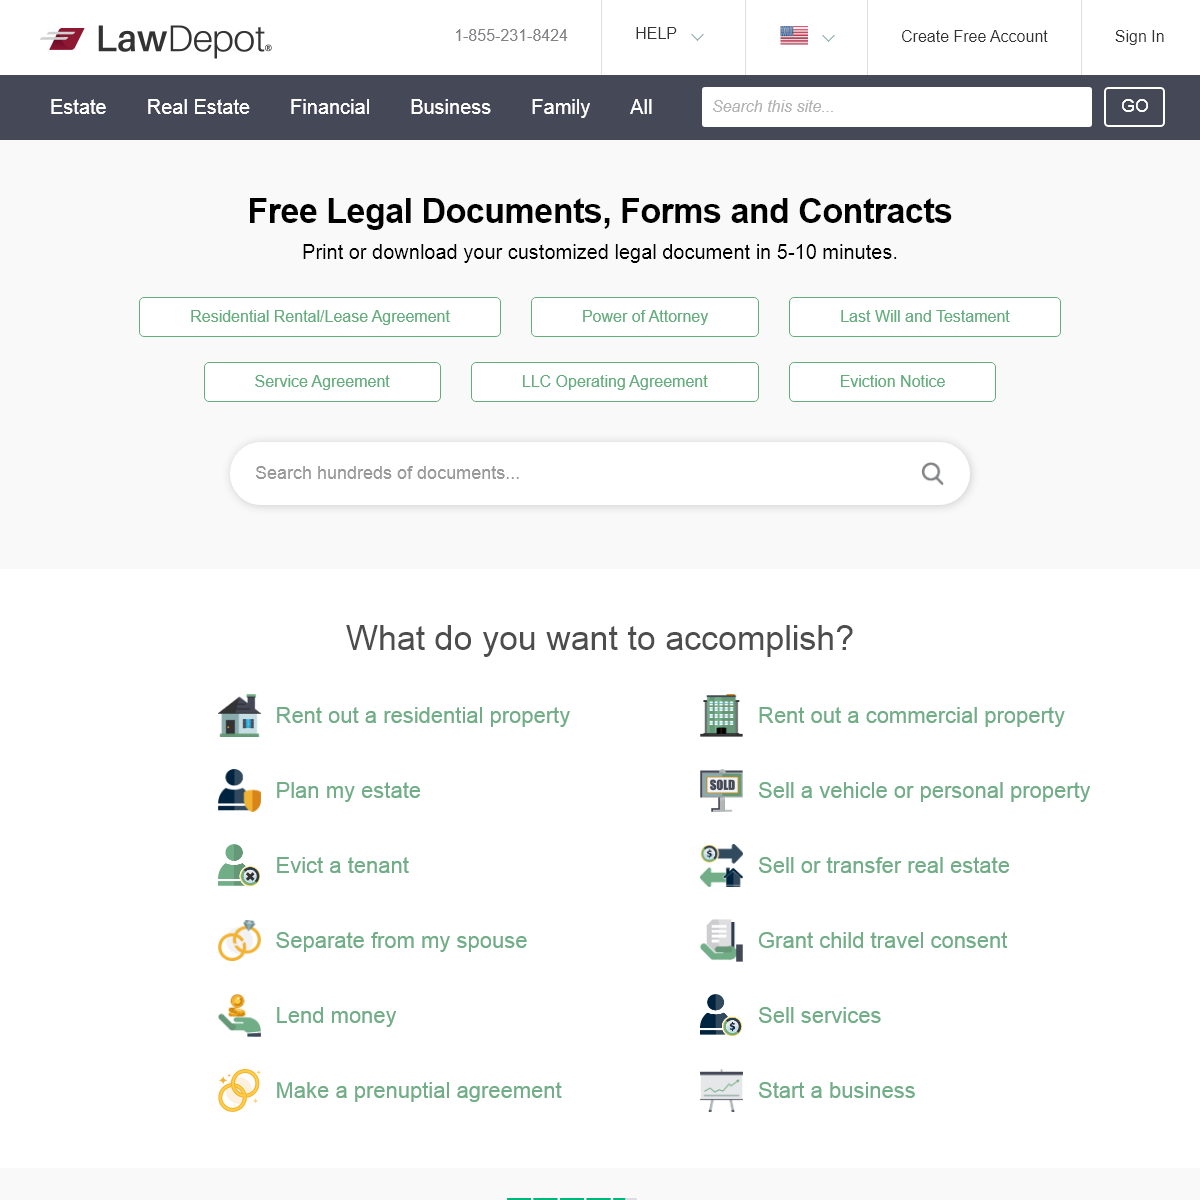 A complete backup of lawdepot.com